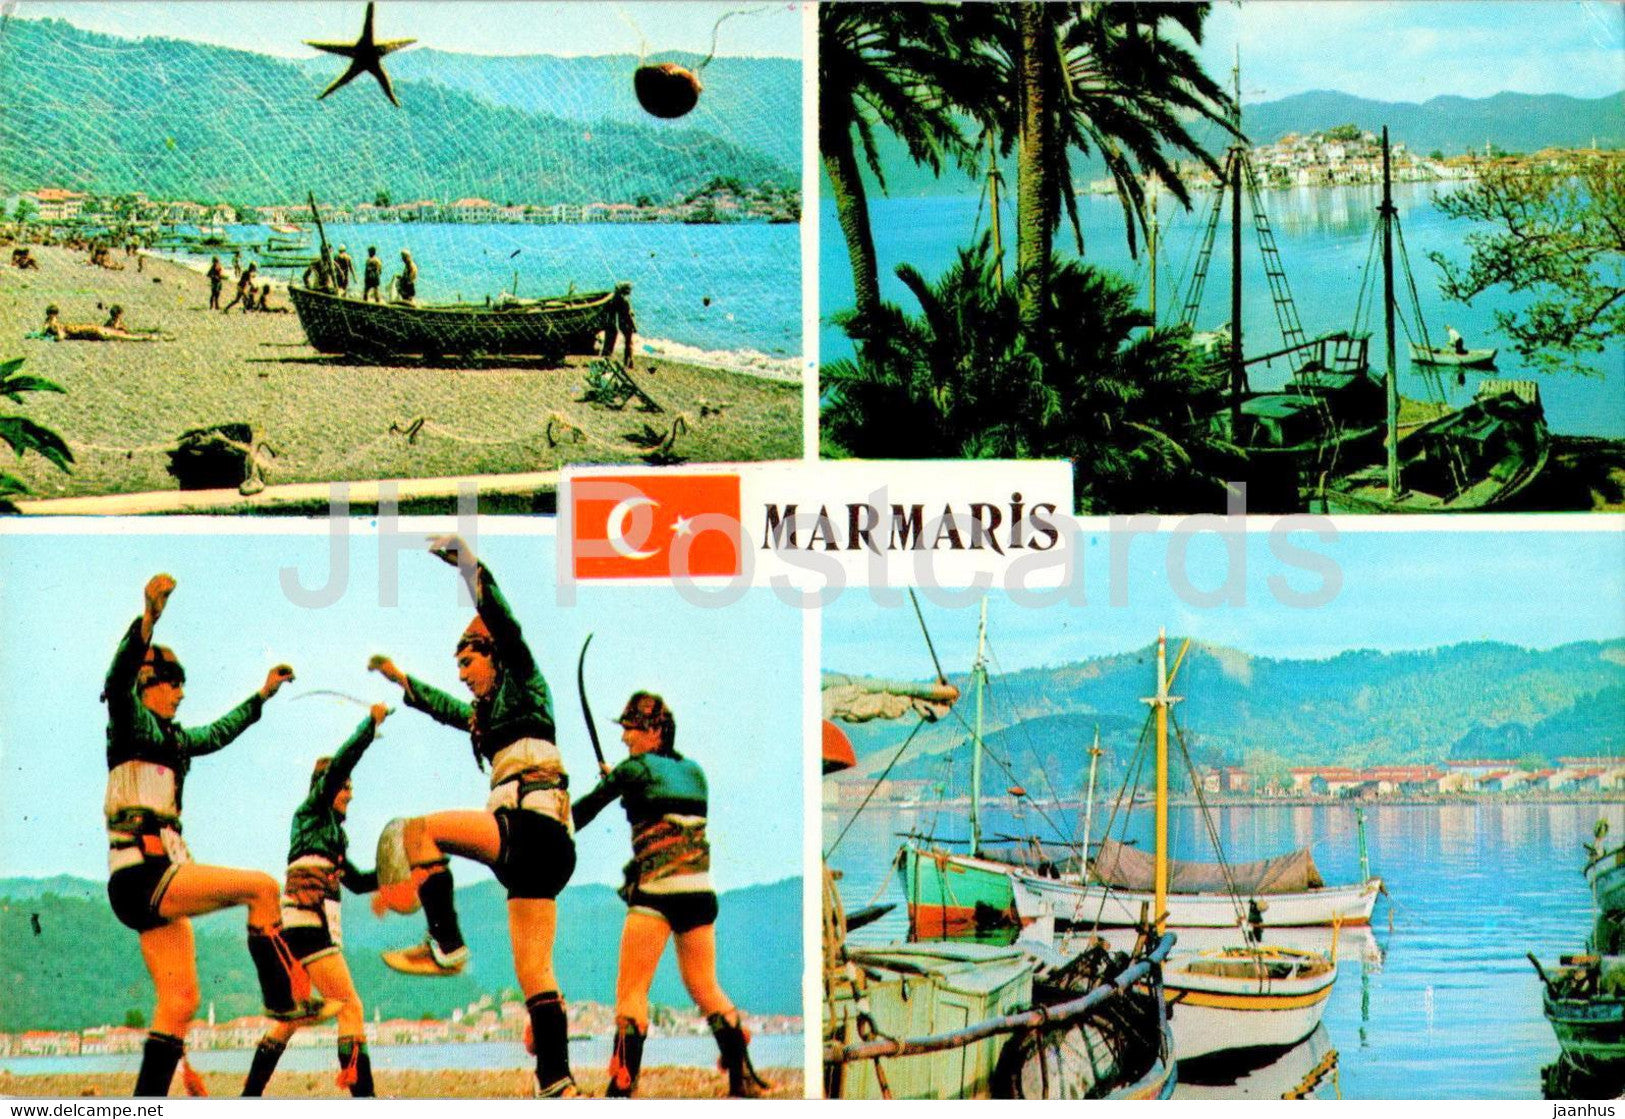 Marmaris - 4 different views of the city - boat - multiview - 48-6 - Turkey - unused - JH Postcards